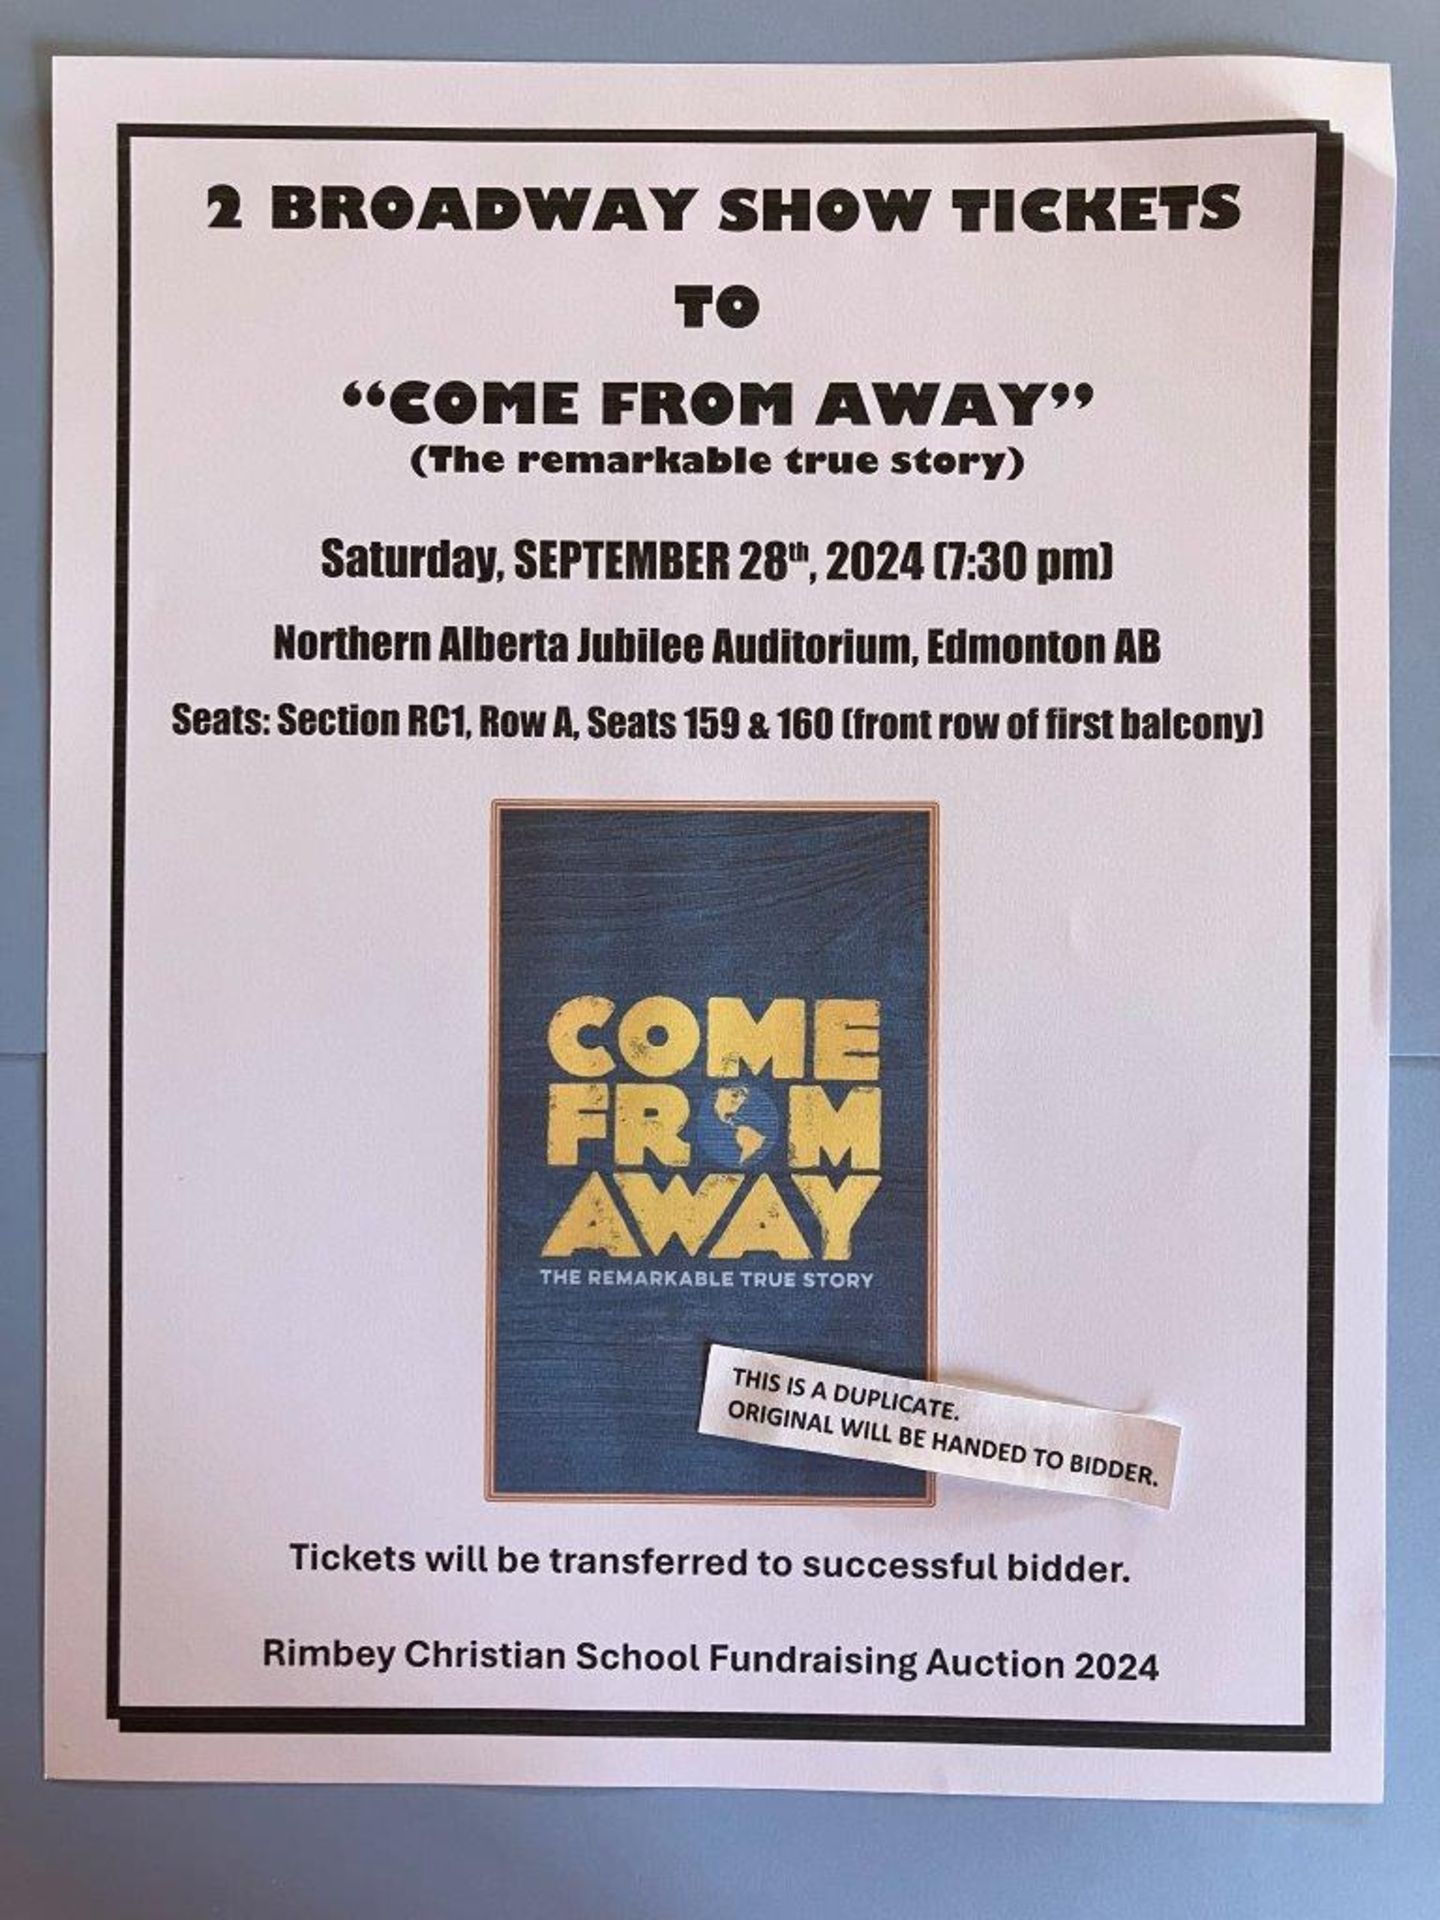 2 BROADWAY SHOW TICKETS TO "COME FROM AWAY"